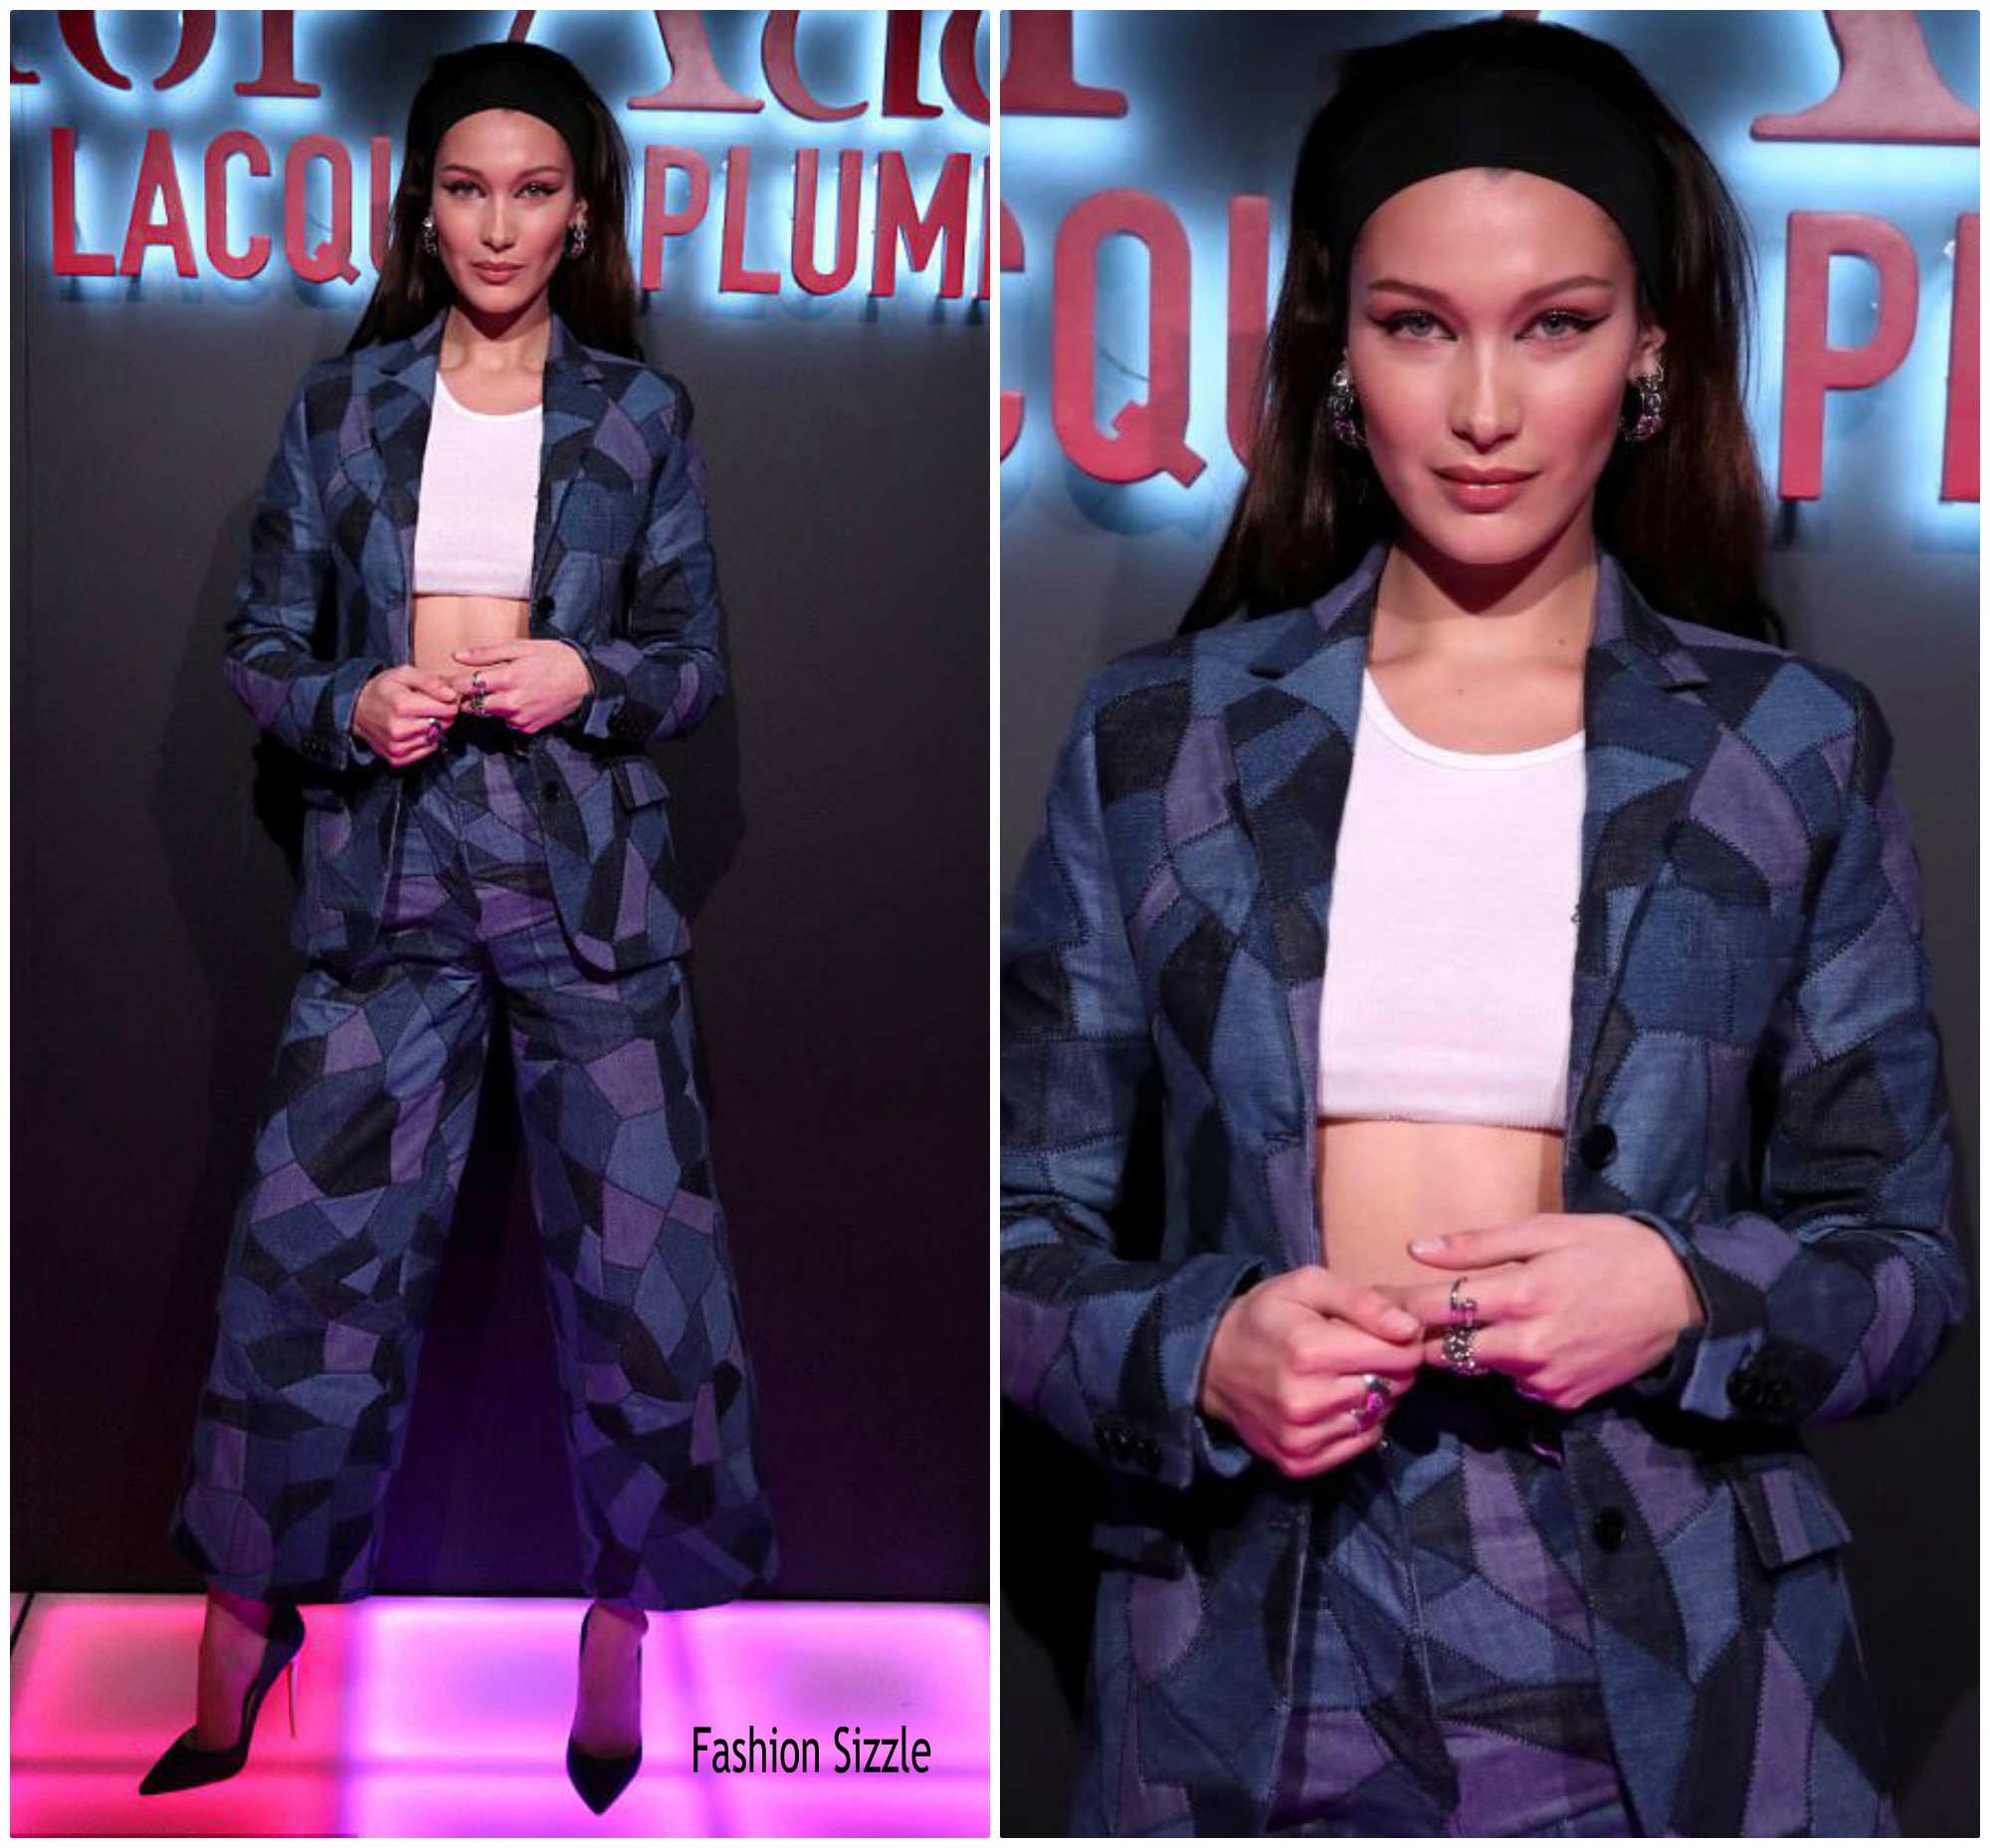 bella-hadid-in-patchwork-suit-dior-addict-lacquer-pump-launch-party-in-la